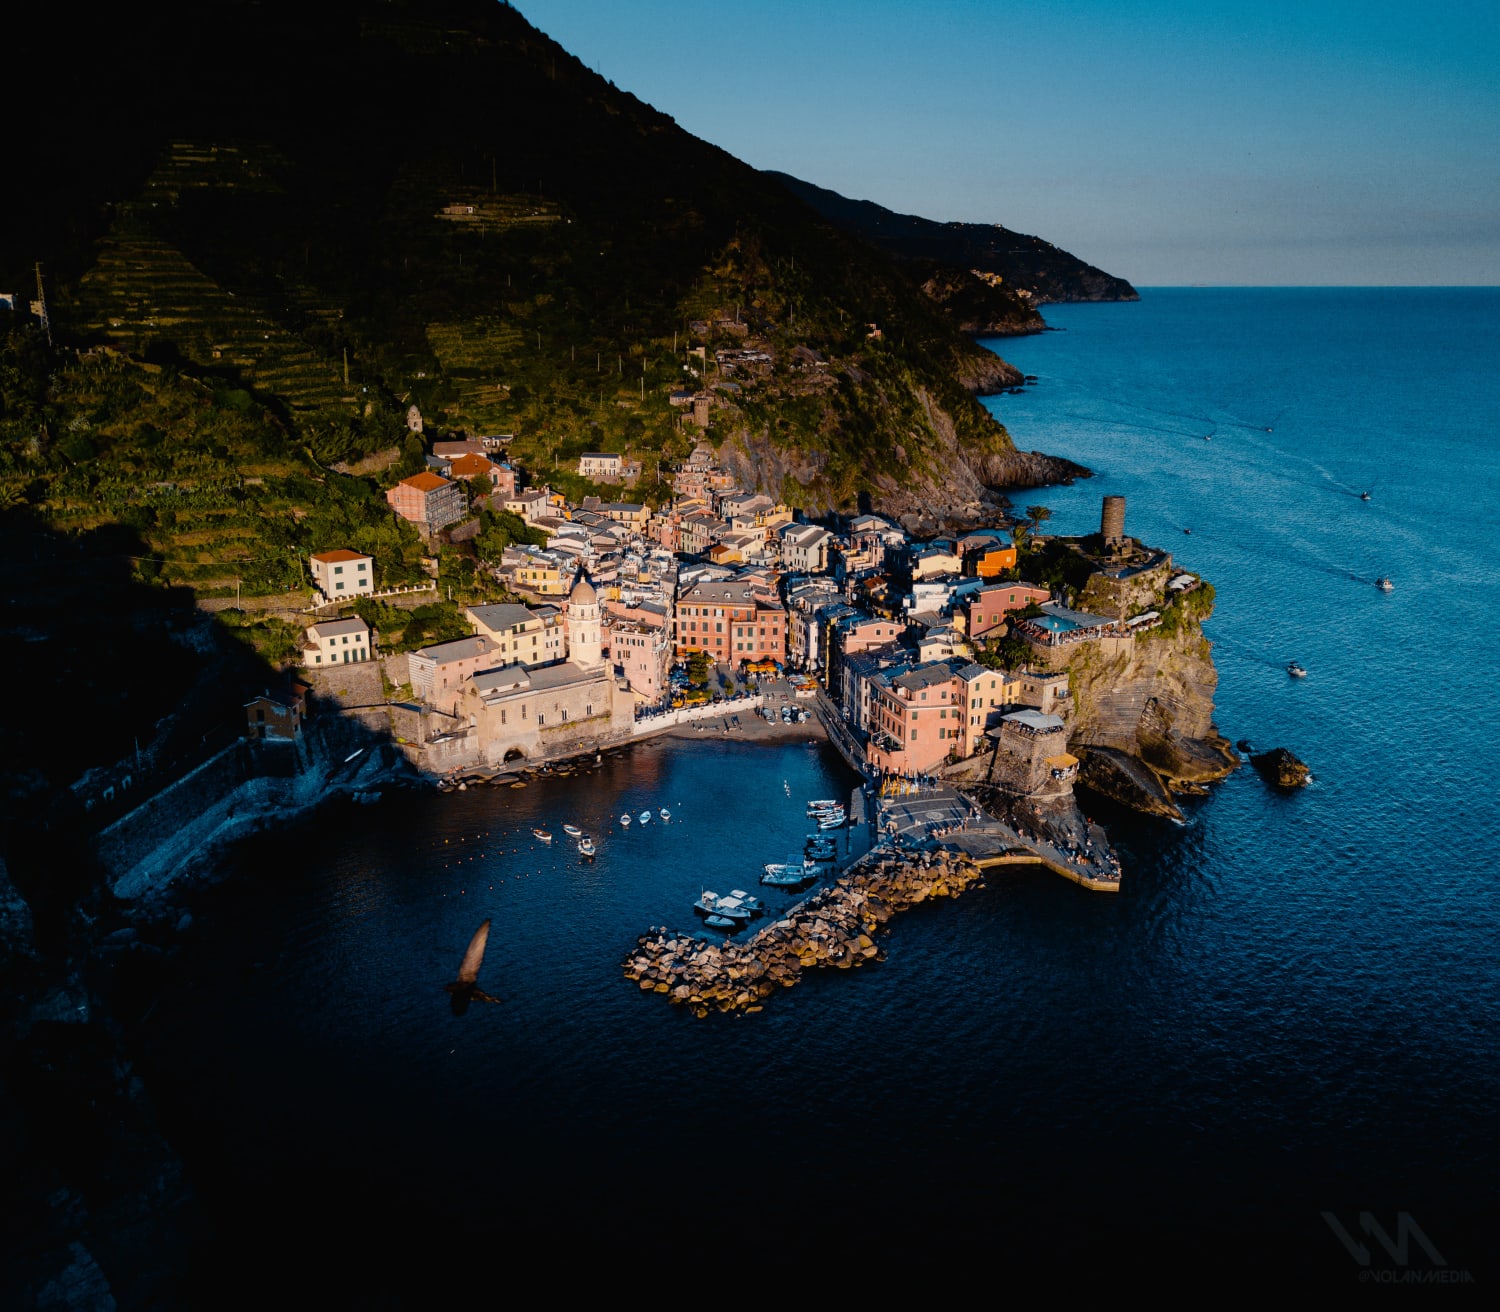 Vernazza: One of the most stunning cliff-side towns in Italy